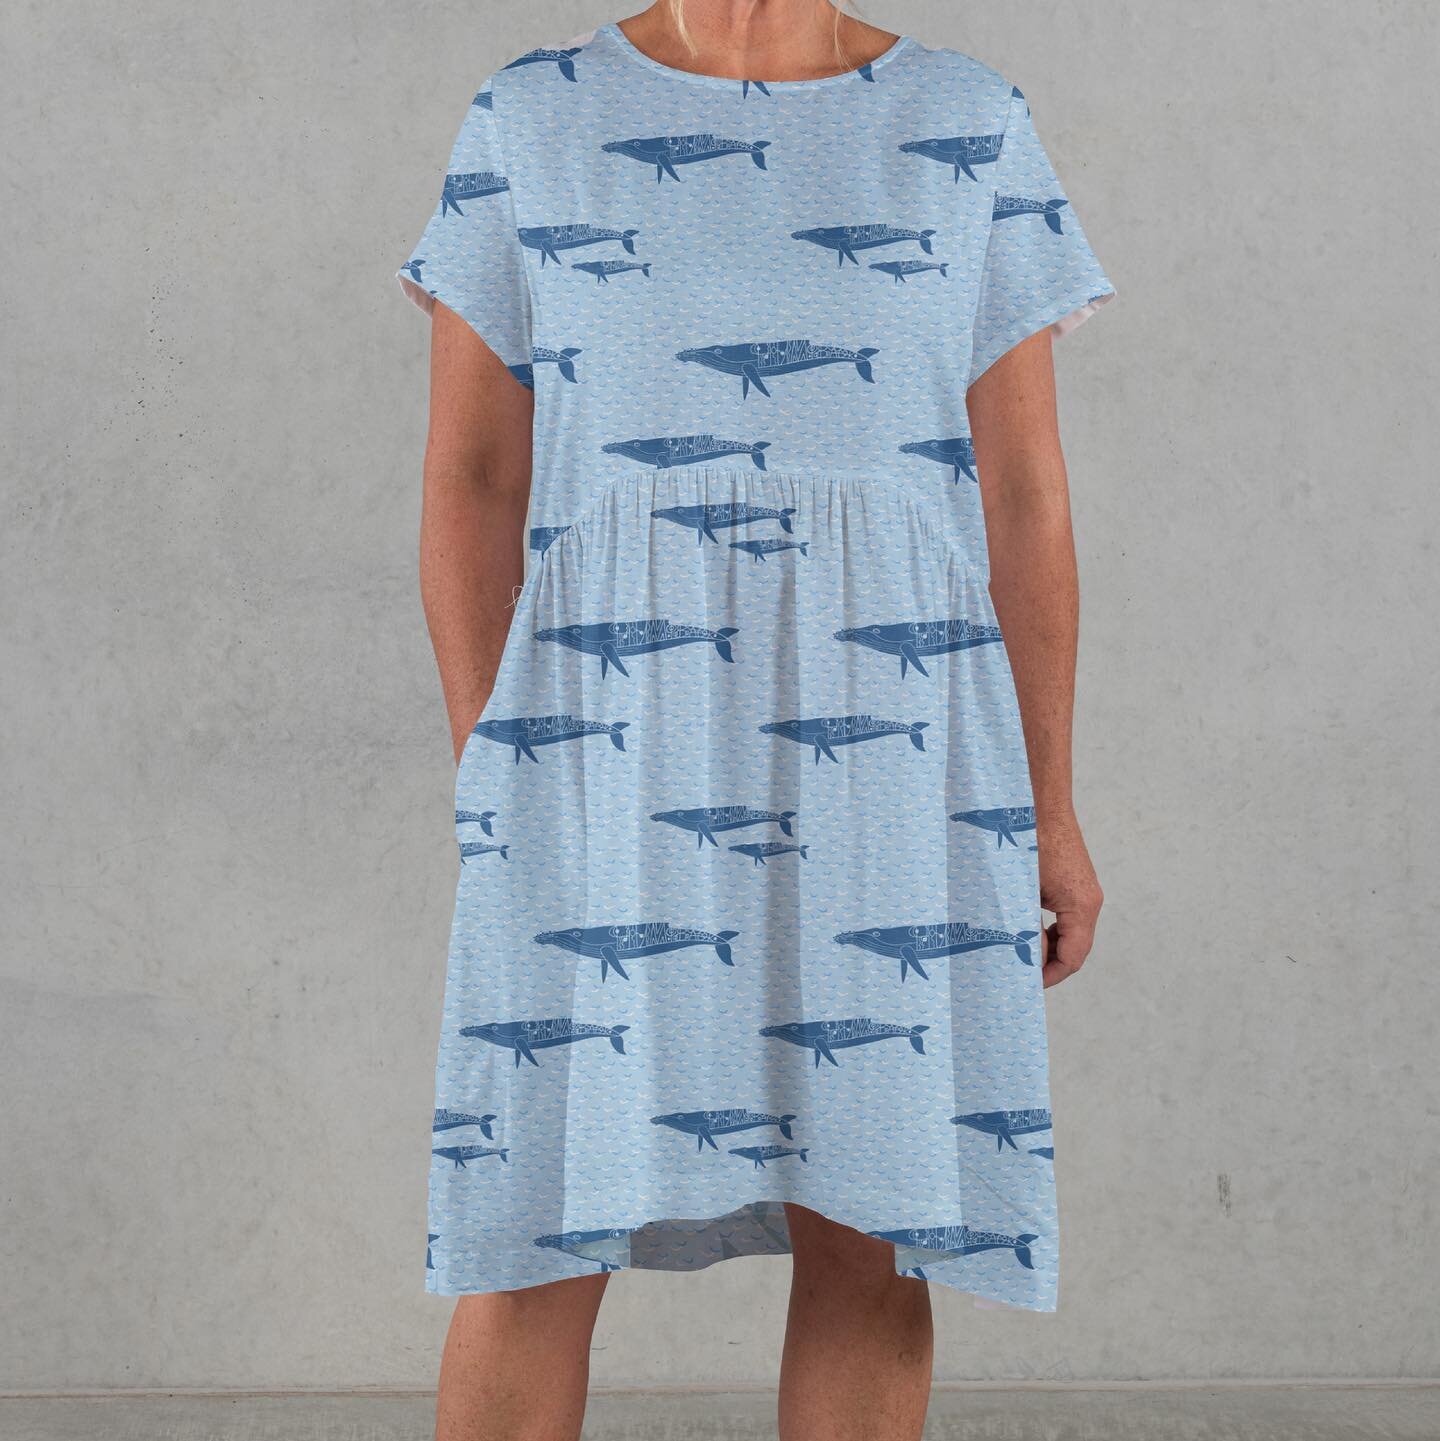 Baby blue whales migrating fabric by inkmo, available on Spoonflower. Link in bio. Who wouldn't want a cotton summer dress out of this?